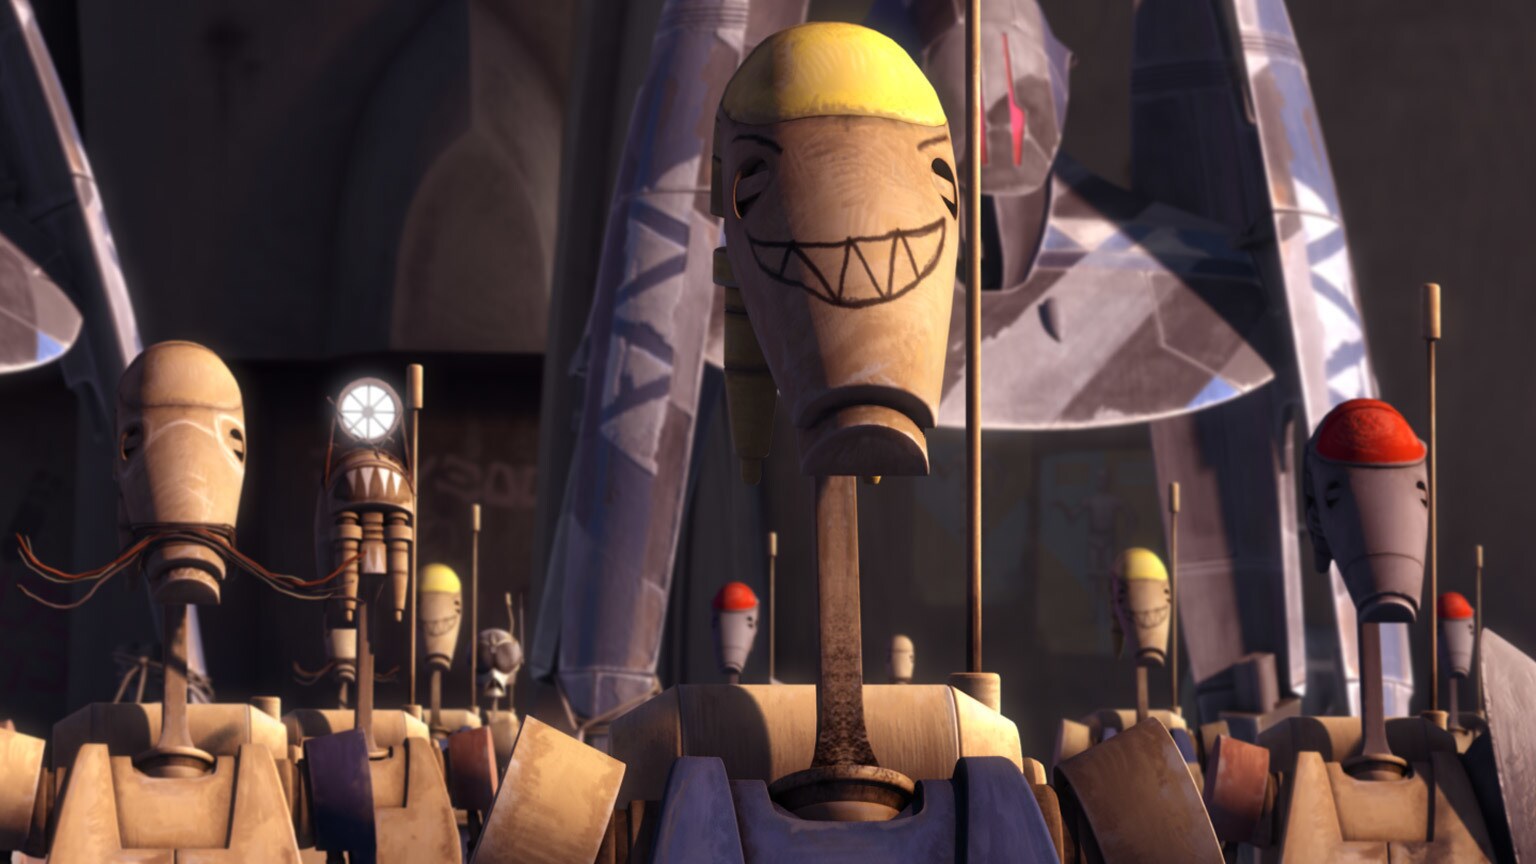 The Clone Wars Rewatch: That's No "Mystery of a Thousand Moons," It's a Security Field